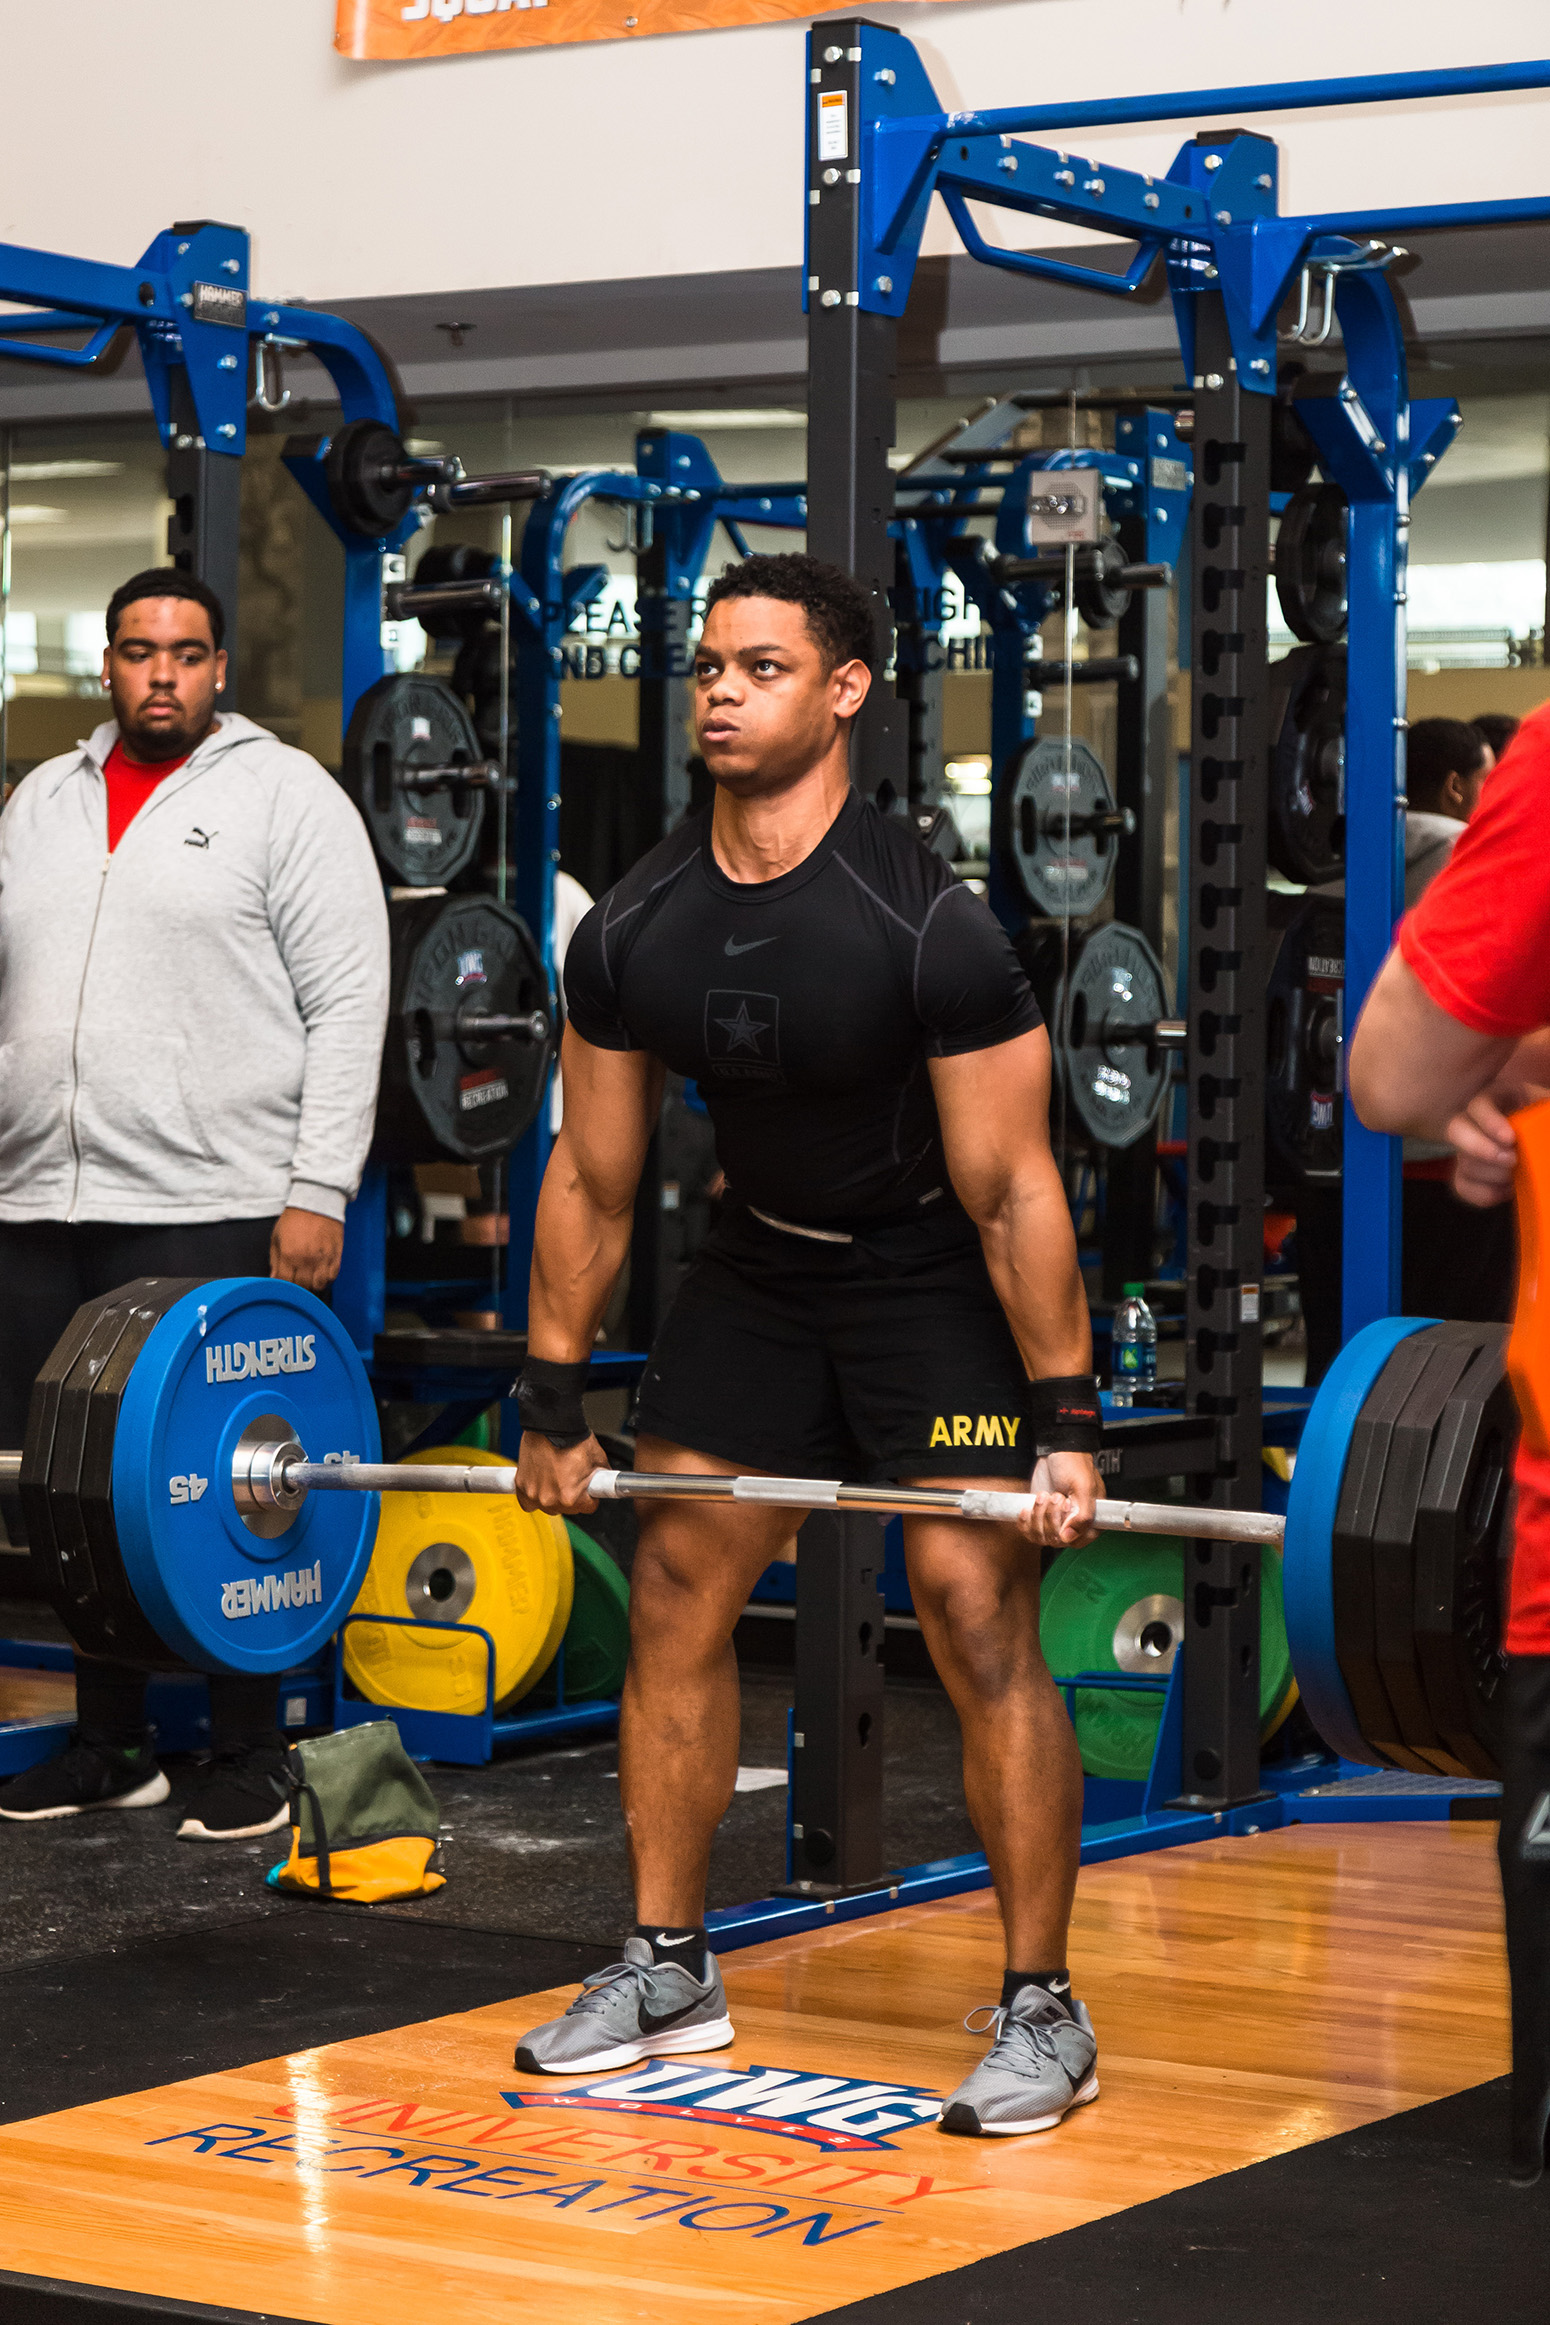 Student with army shorts doing a deadlift at the Campus Center during a powerlifting competition